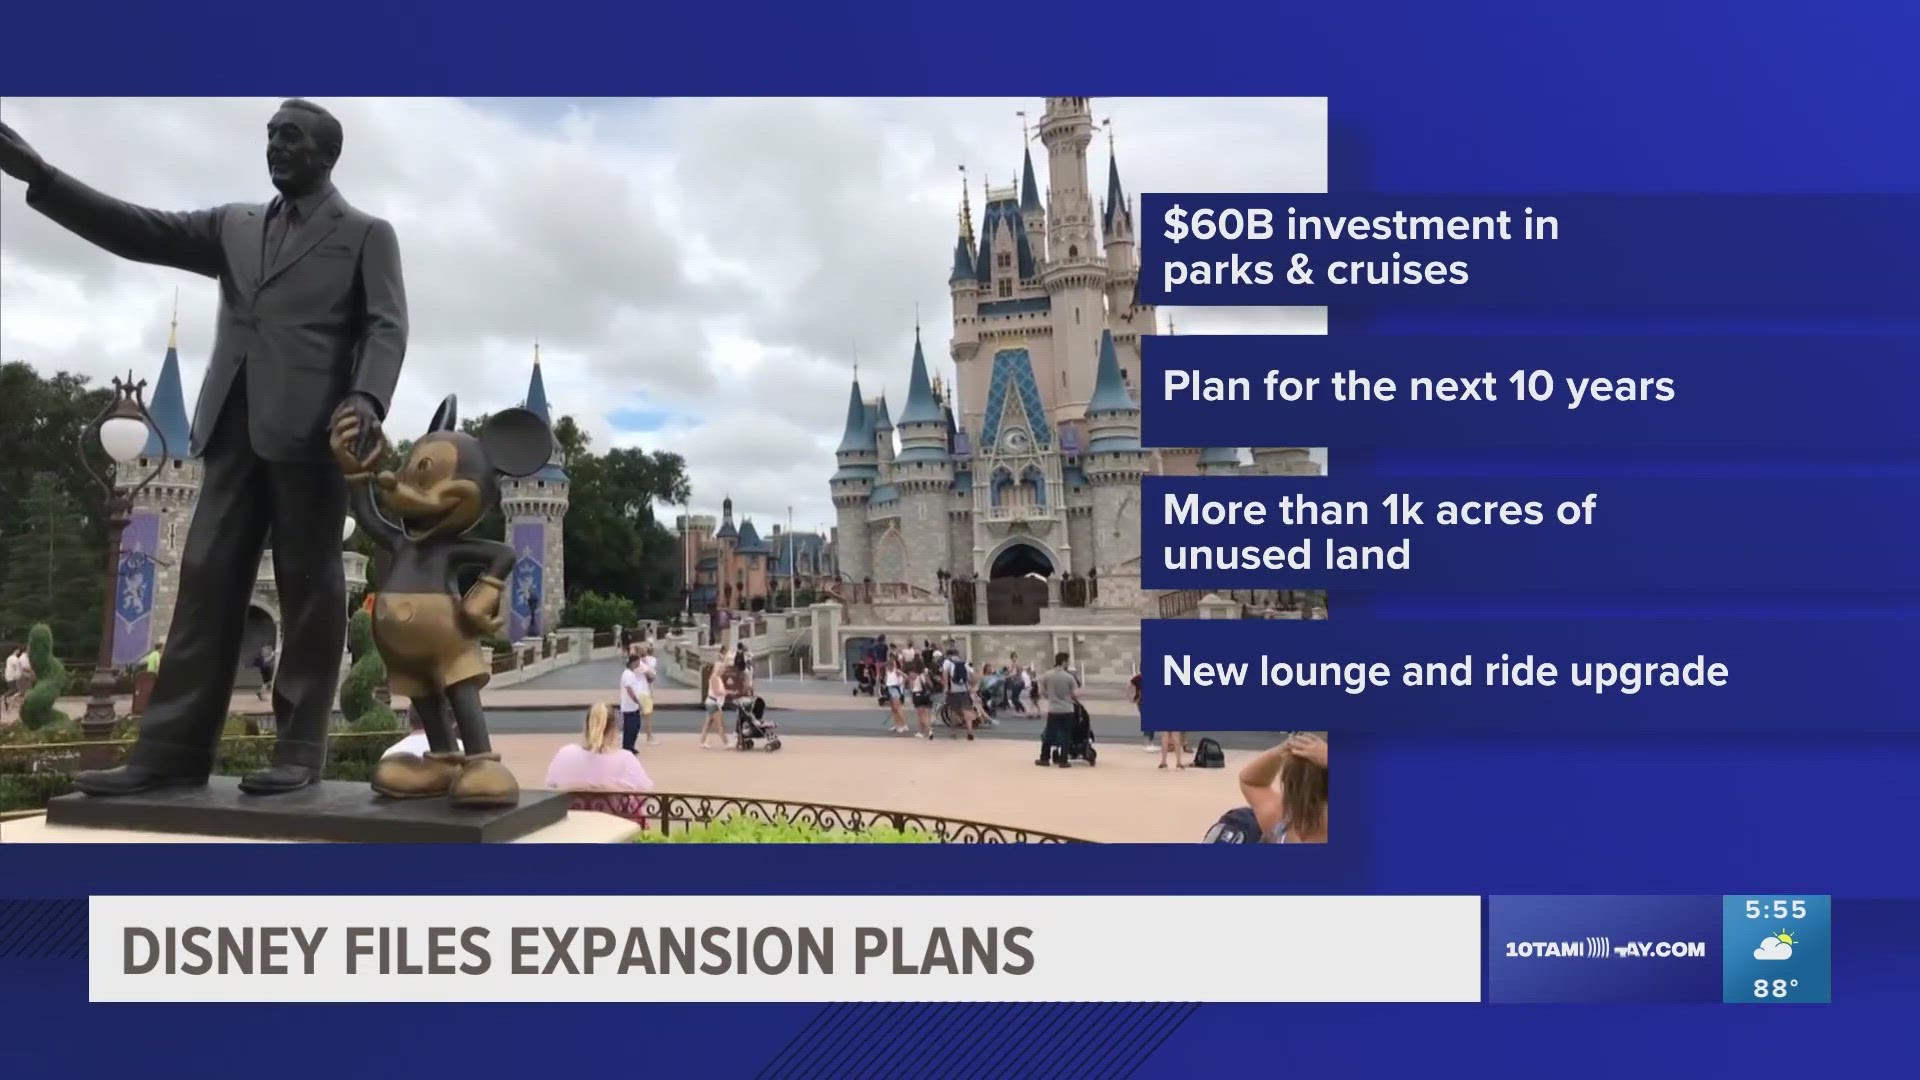 Disney said it has significant room to expand its theme parks further, with more than 1,000 acres of land available across its existing sites.